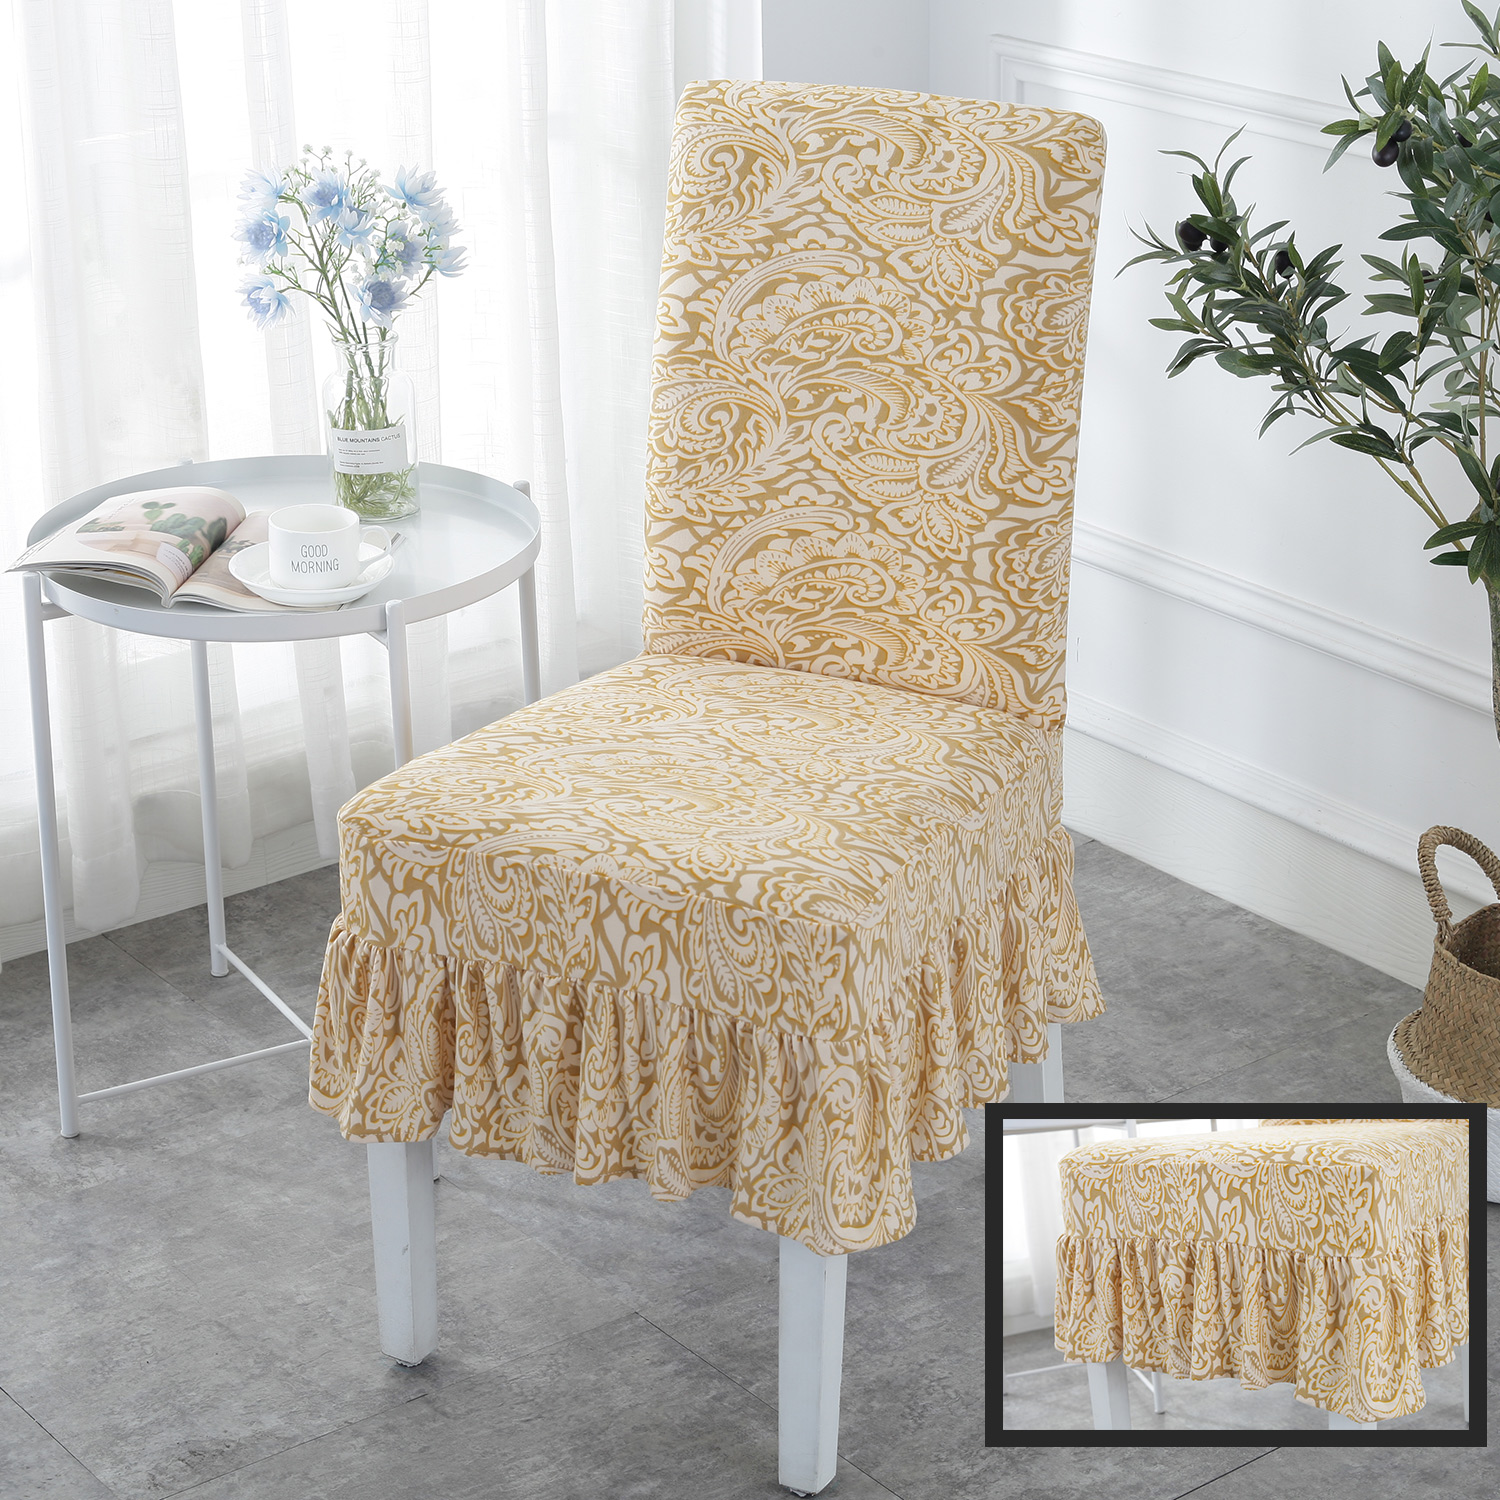 Apartment Home Usage Fancy Patterned Dining Chair Covers Spandex To Protect Chairs From Spills Stains Dirt Grime Wear Shabby